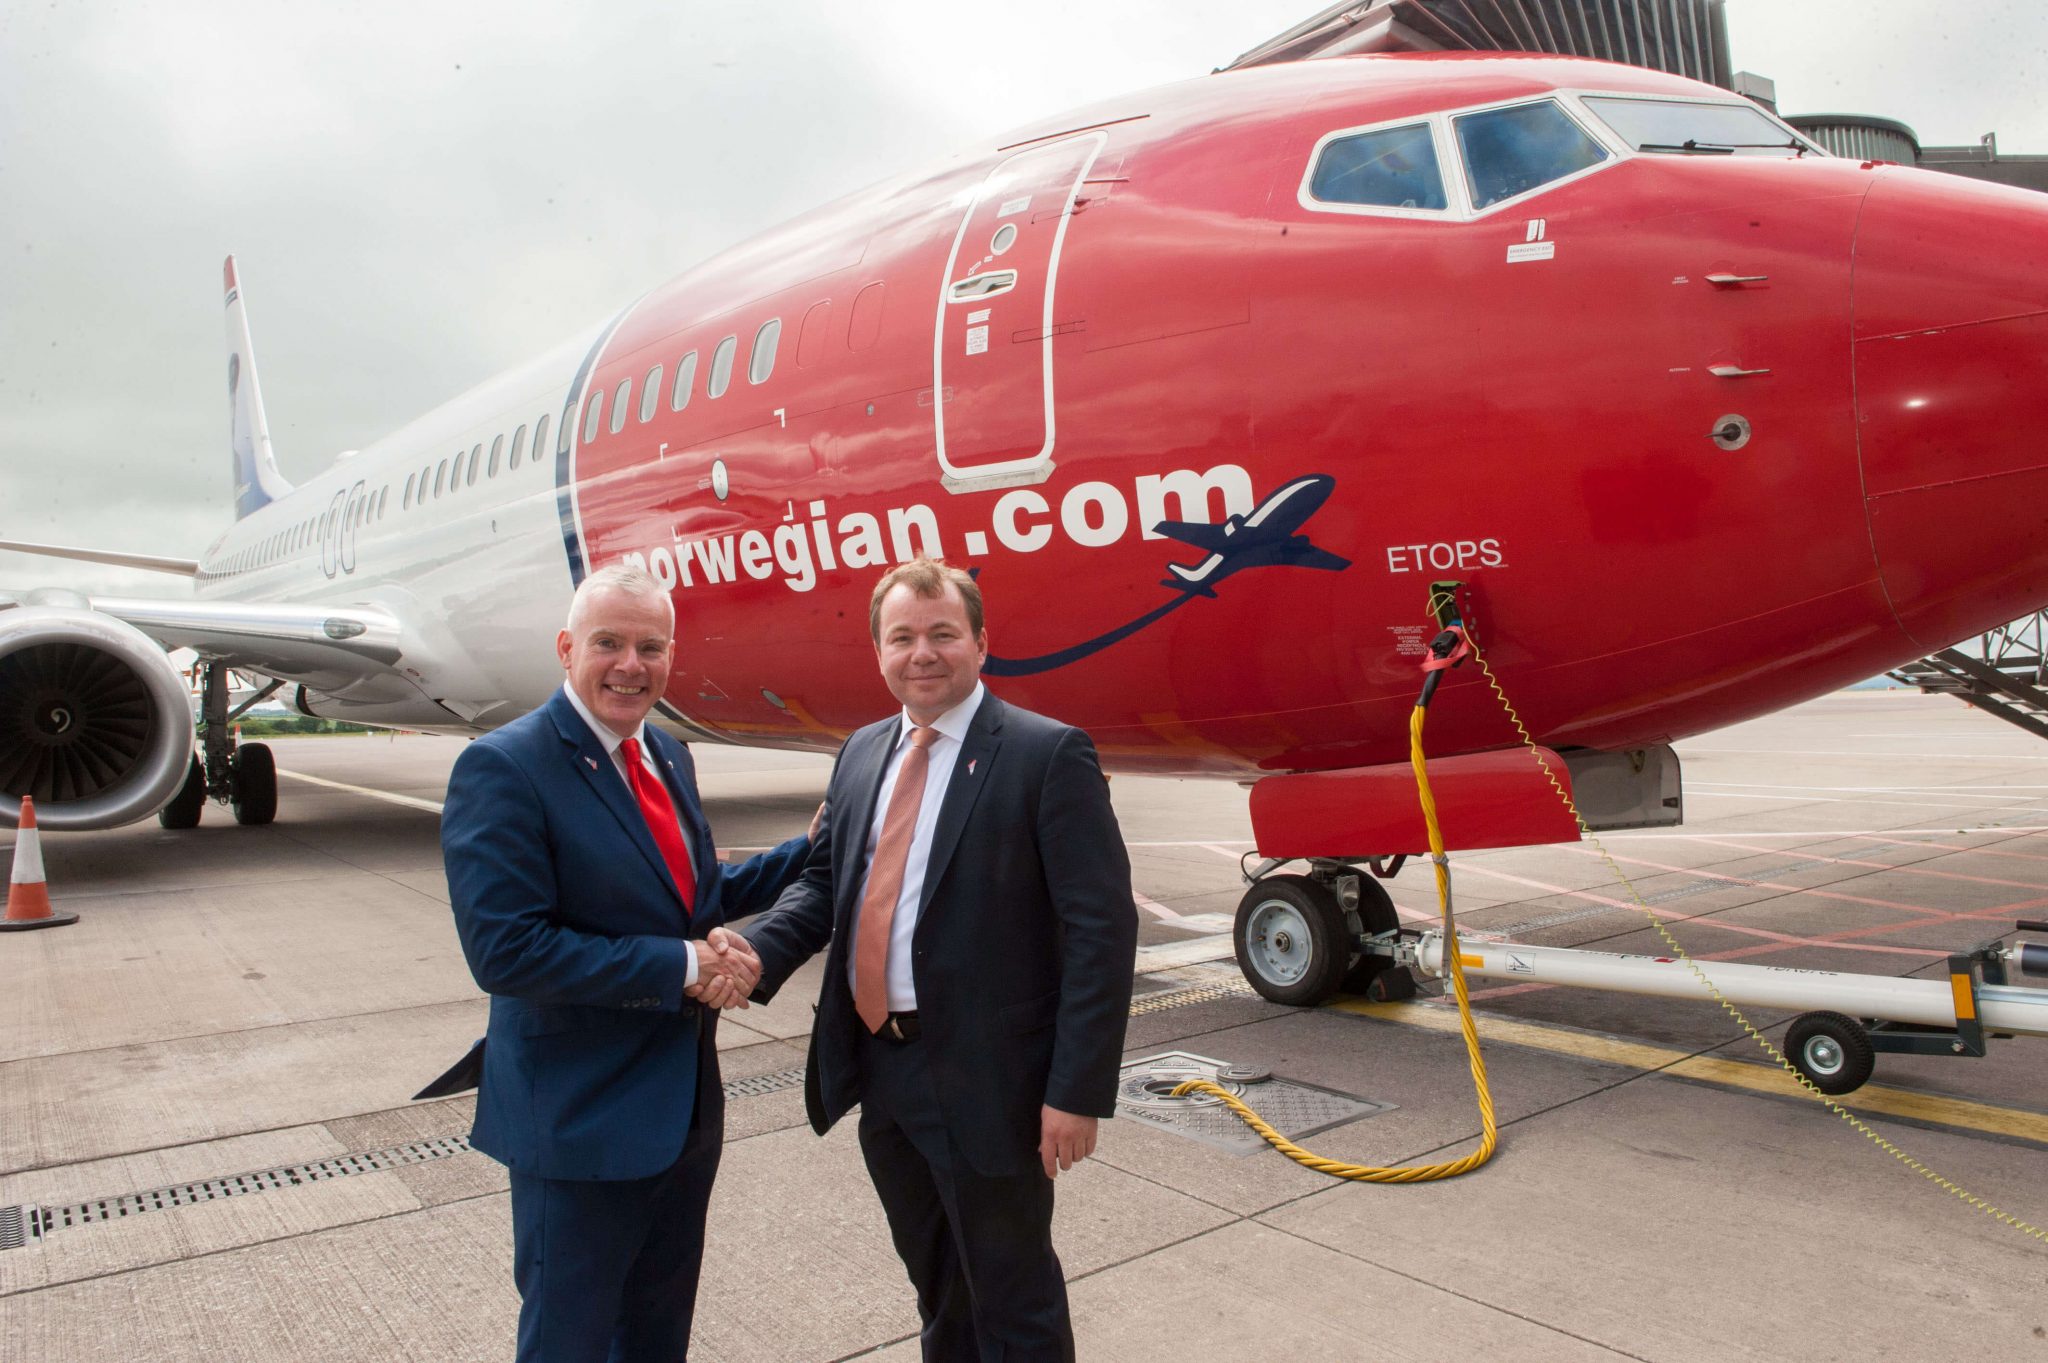 Norwegian’s new transatlantic routes to include U.S Preclearance for passengers flying from Dublin and Shannon